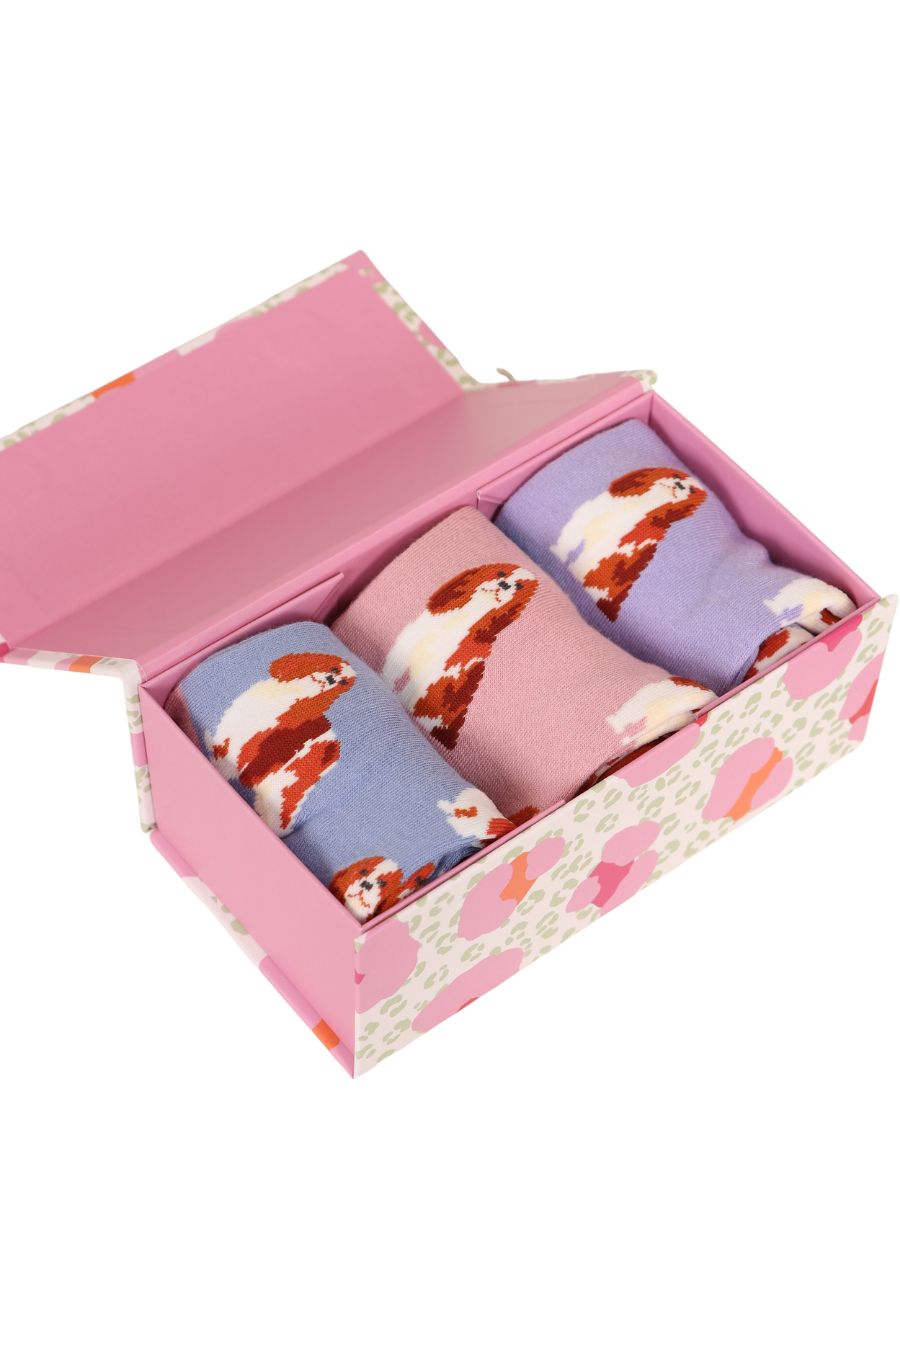 An open gift box showing three colours of Cavalier Spaniel socks, Pink, Purple and Lilac